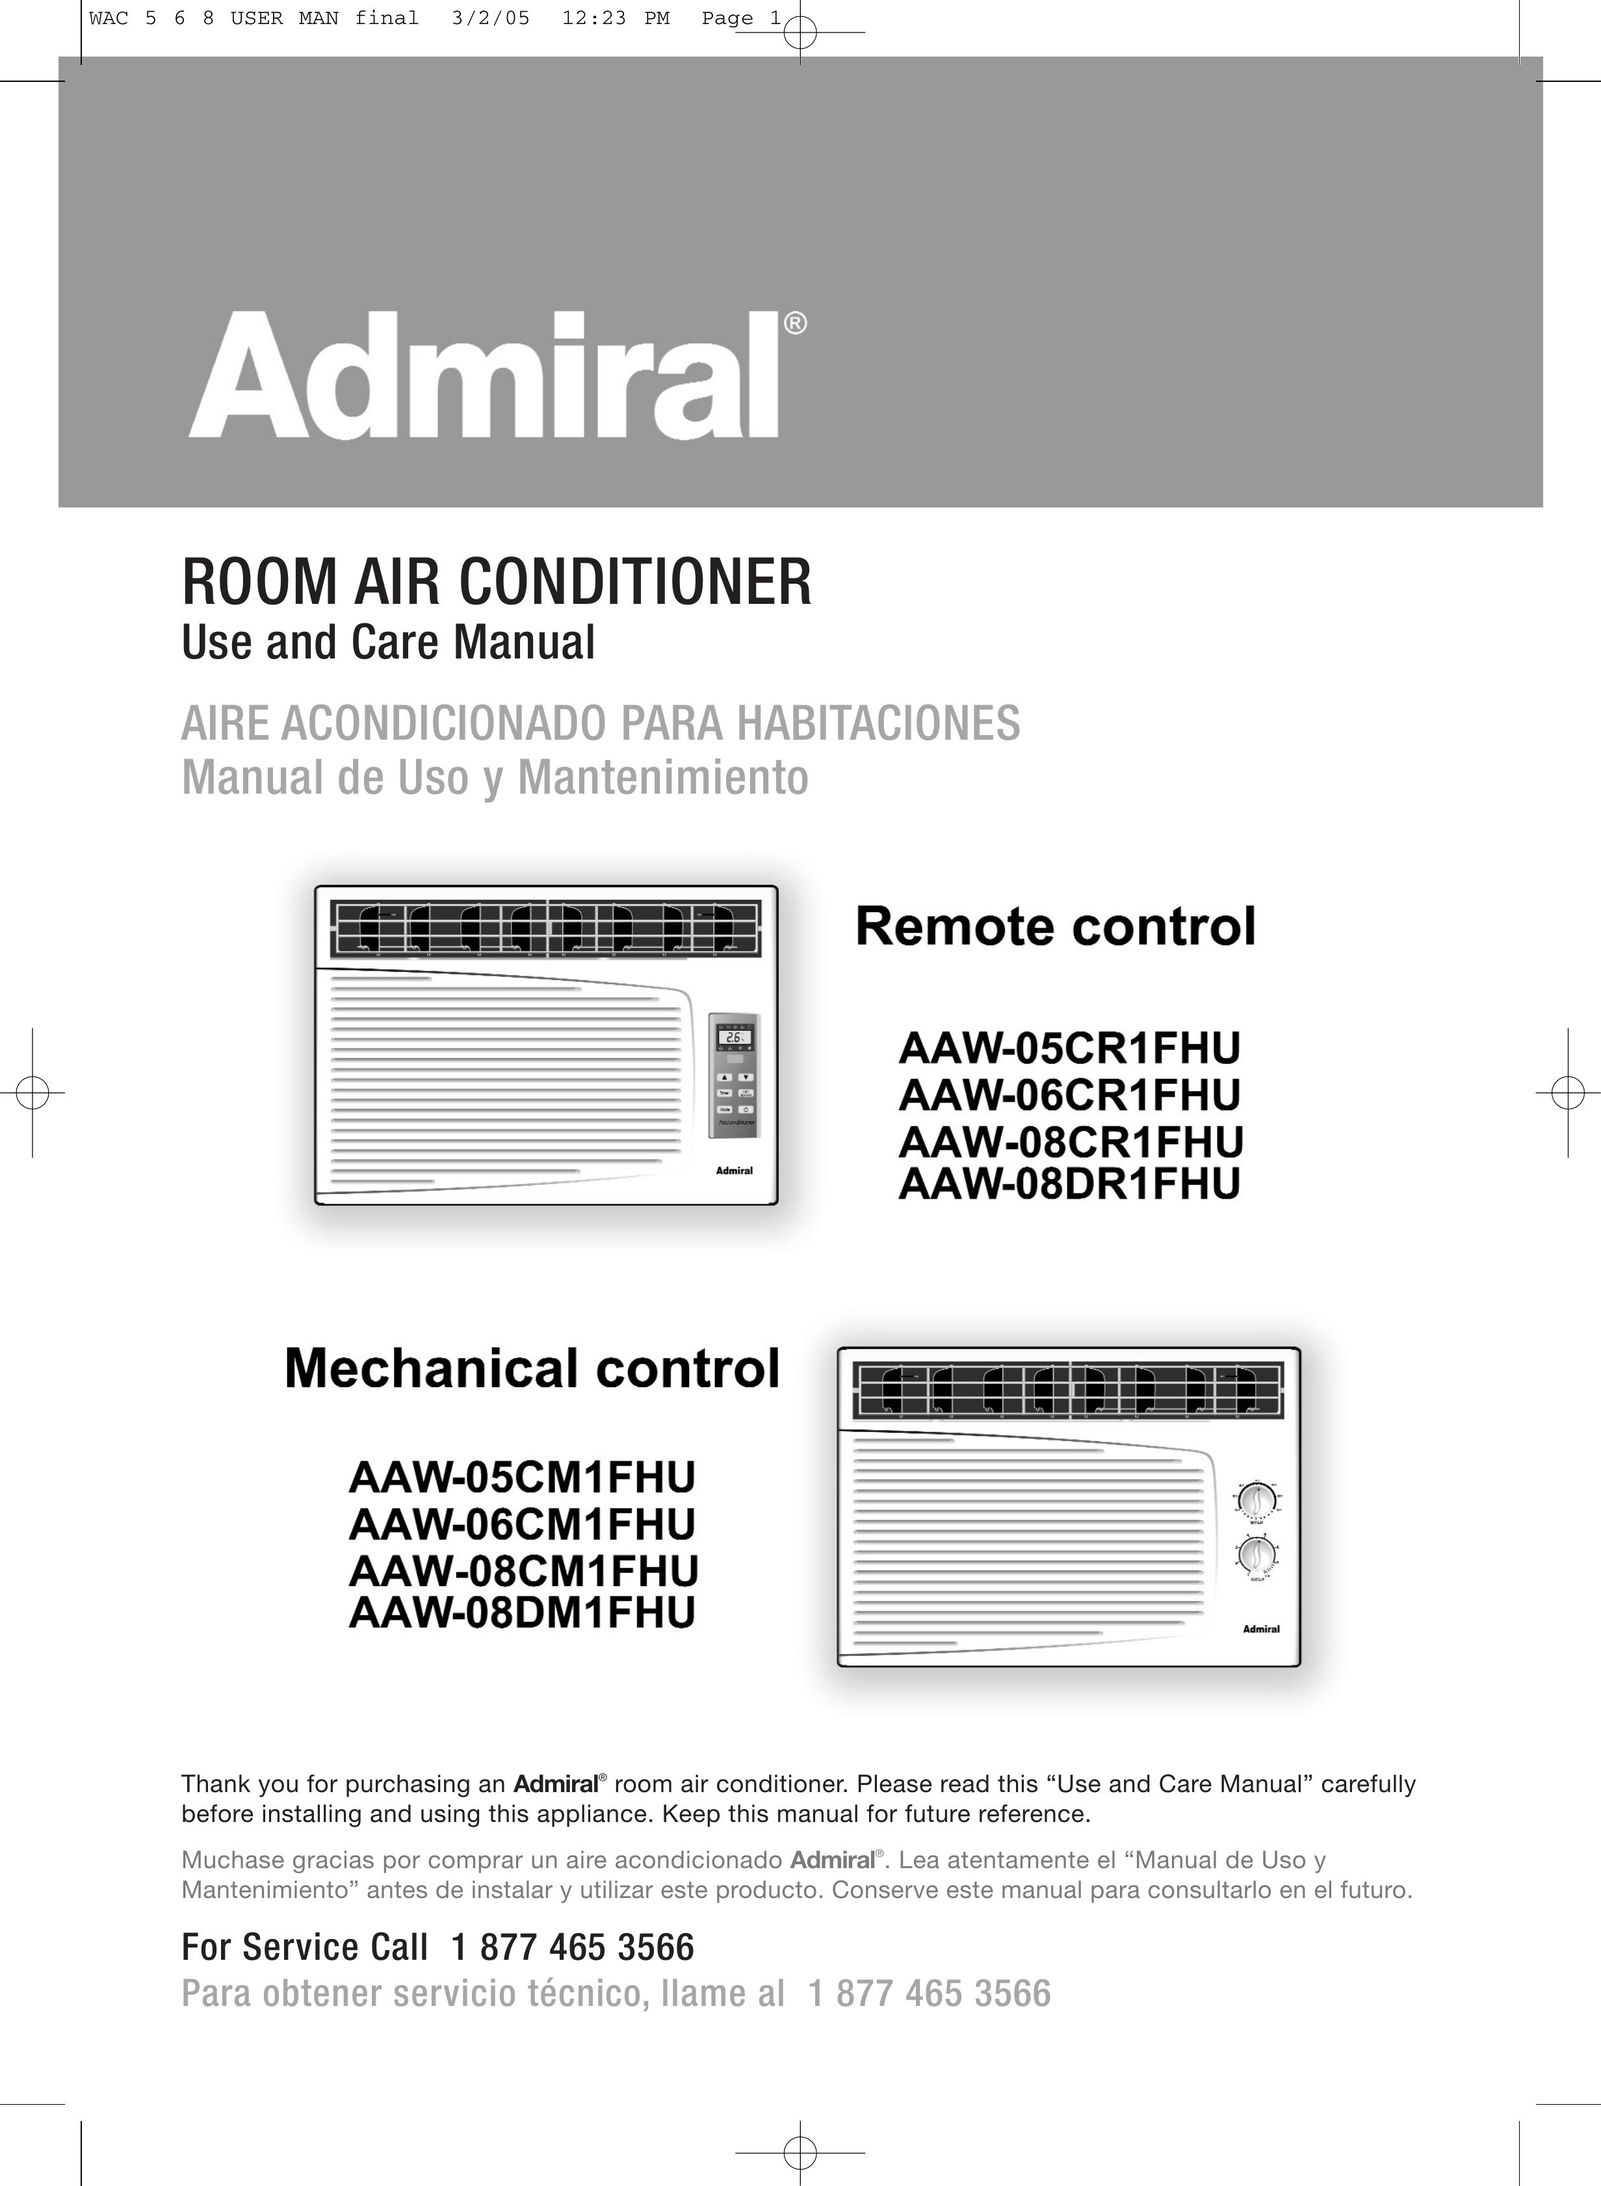 Admiral AAW-08CM1FHU Air Conditioner User Manual (Page 1)